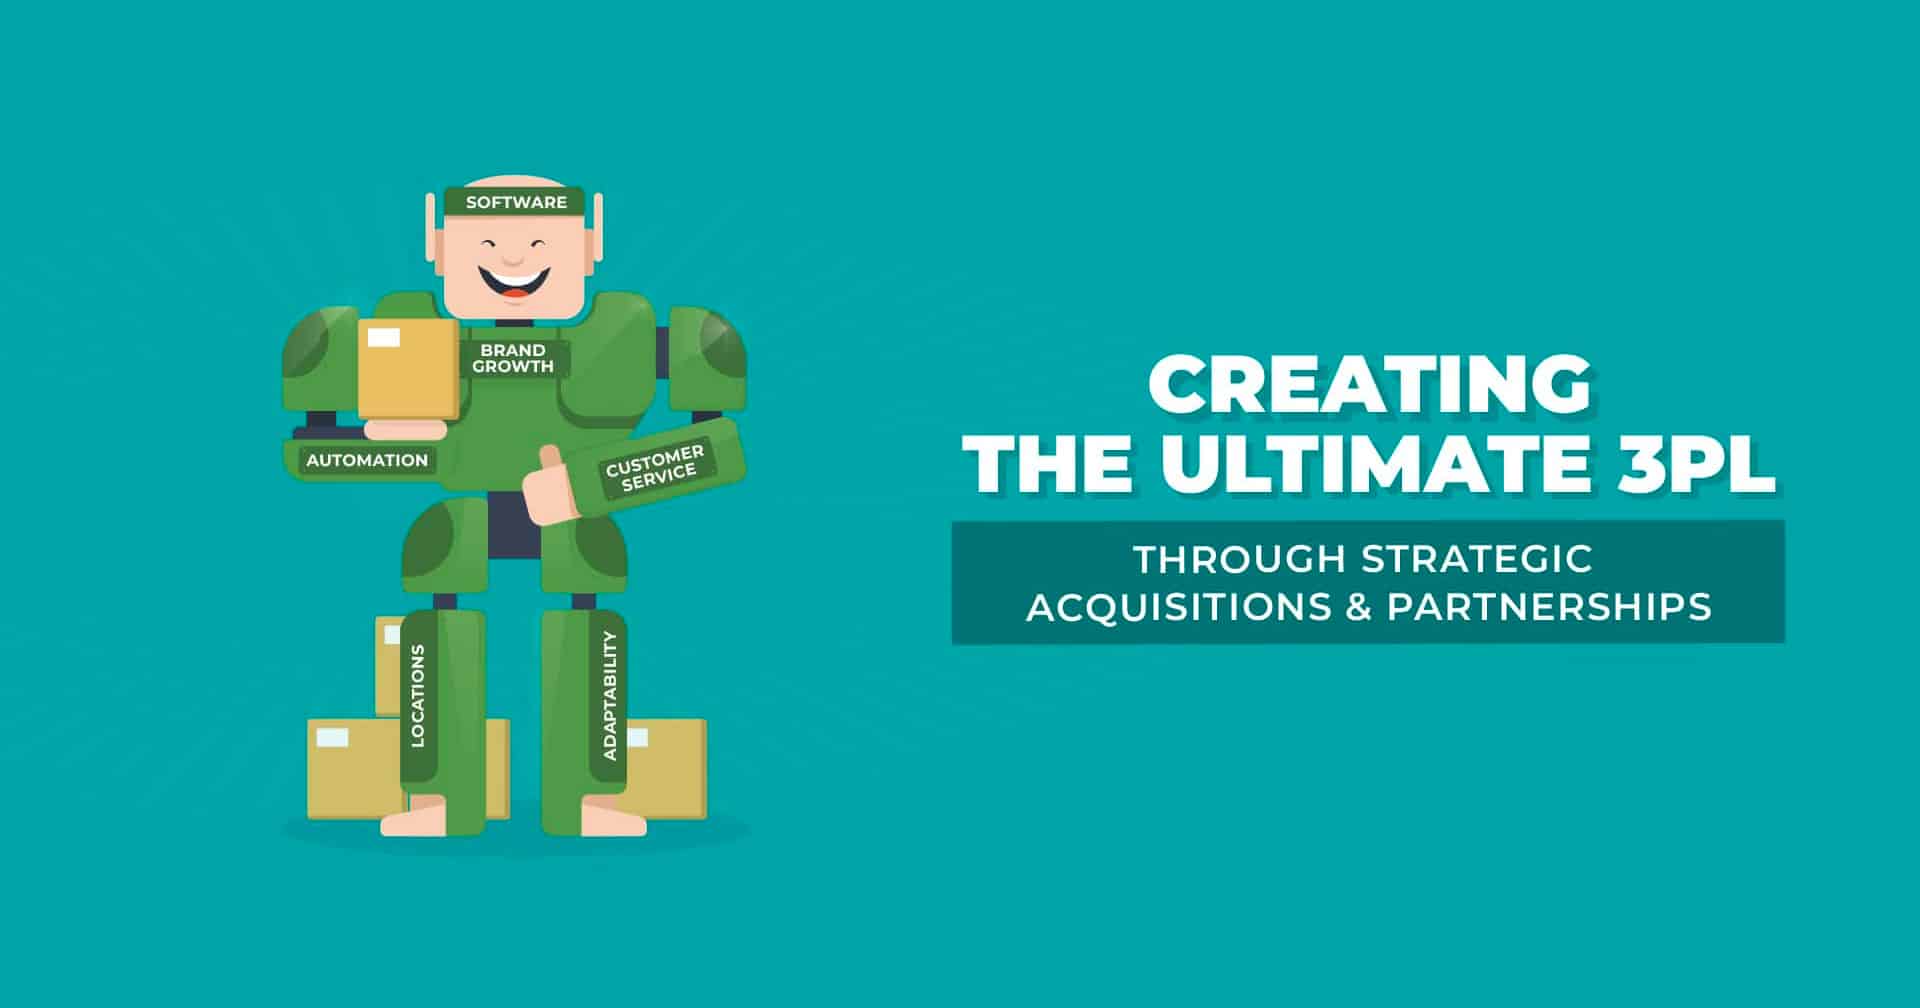 Creating the Ultimate 3PL through Strategic Acquisitions & Partnerships